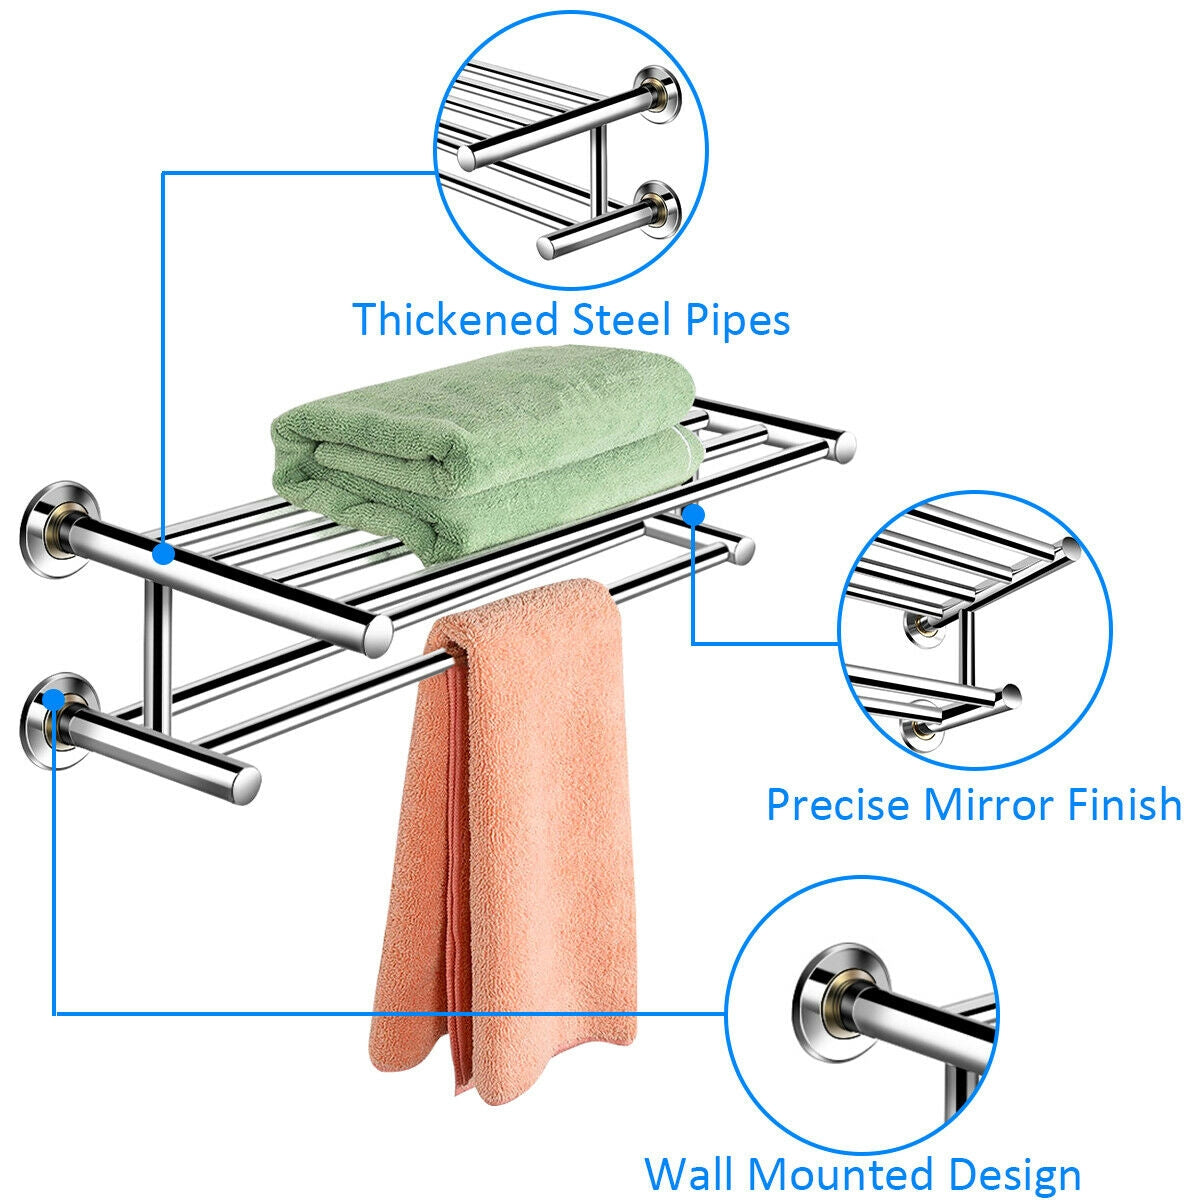 24 Inch Wall Mounted Stainless Steel Towel Storage Rack with 2 Storage Tier - Direct by Wilsons Home Store